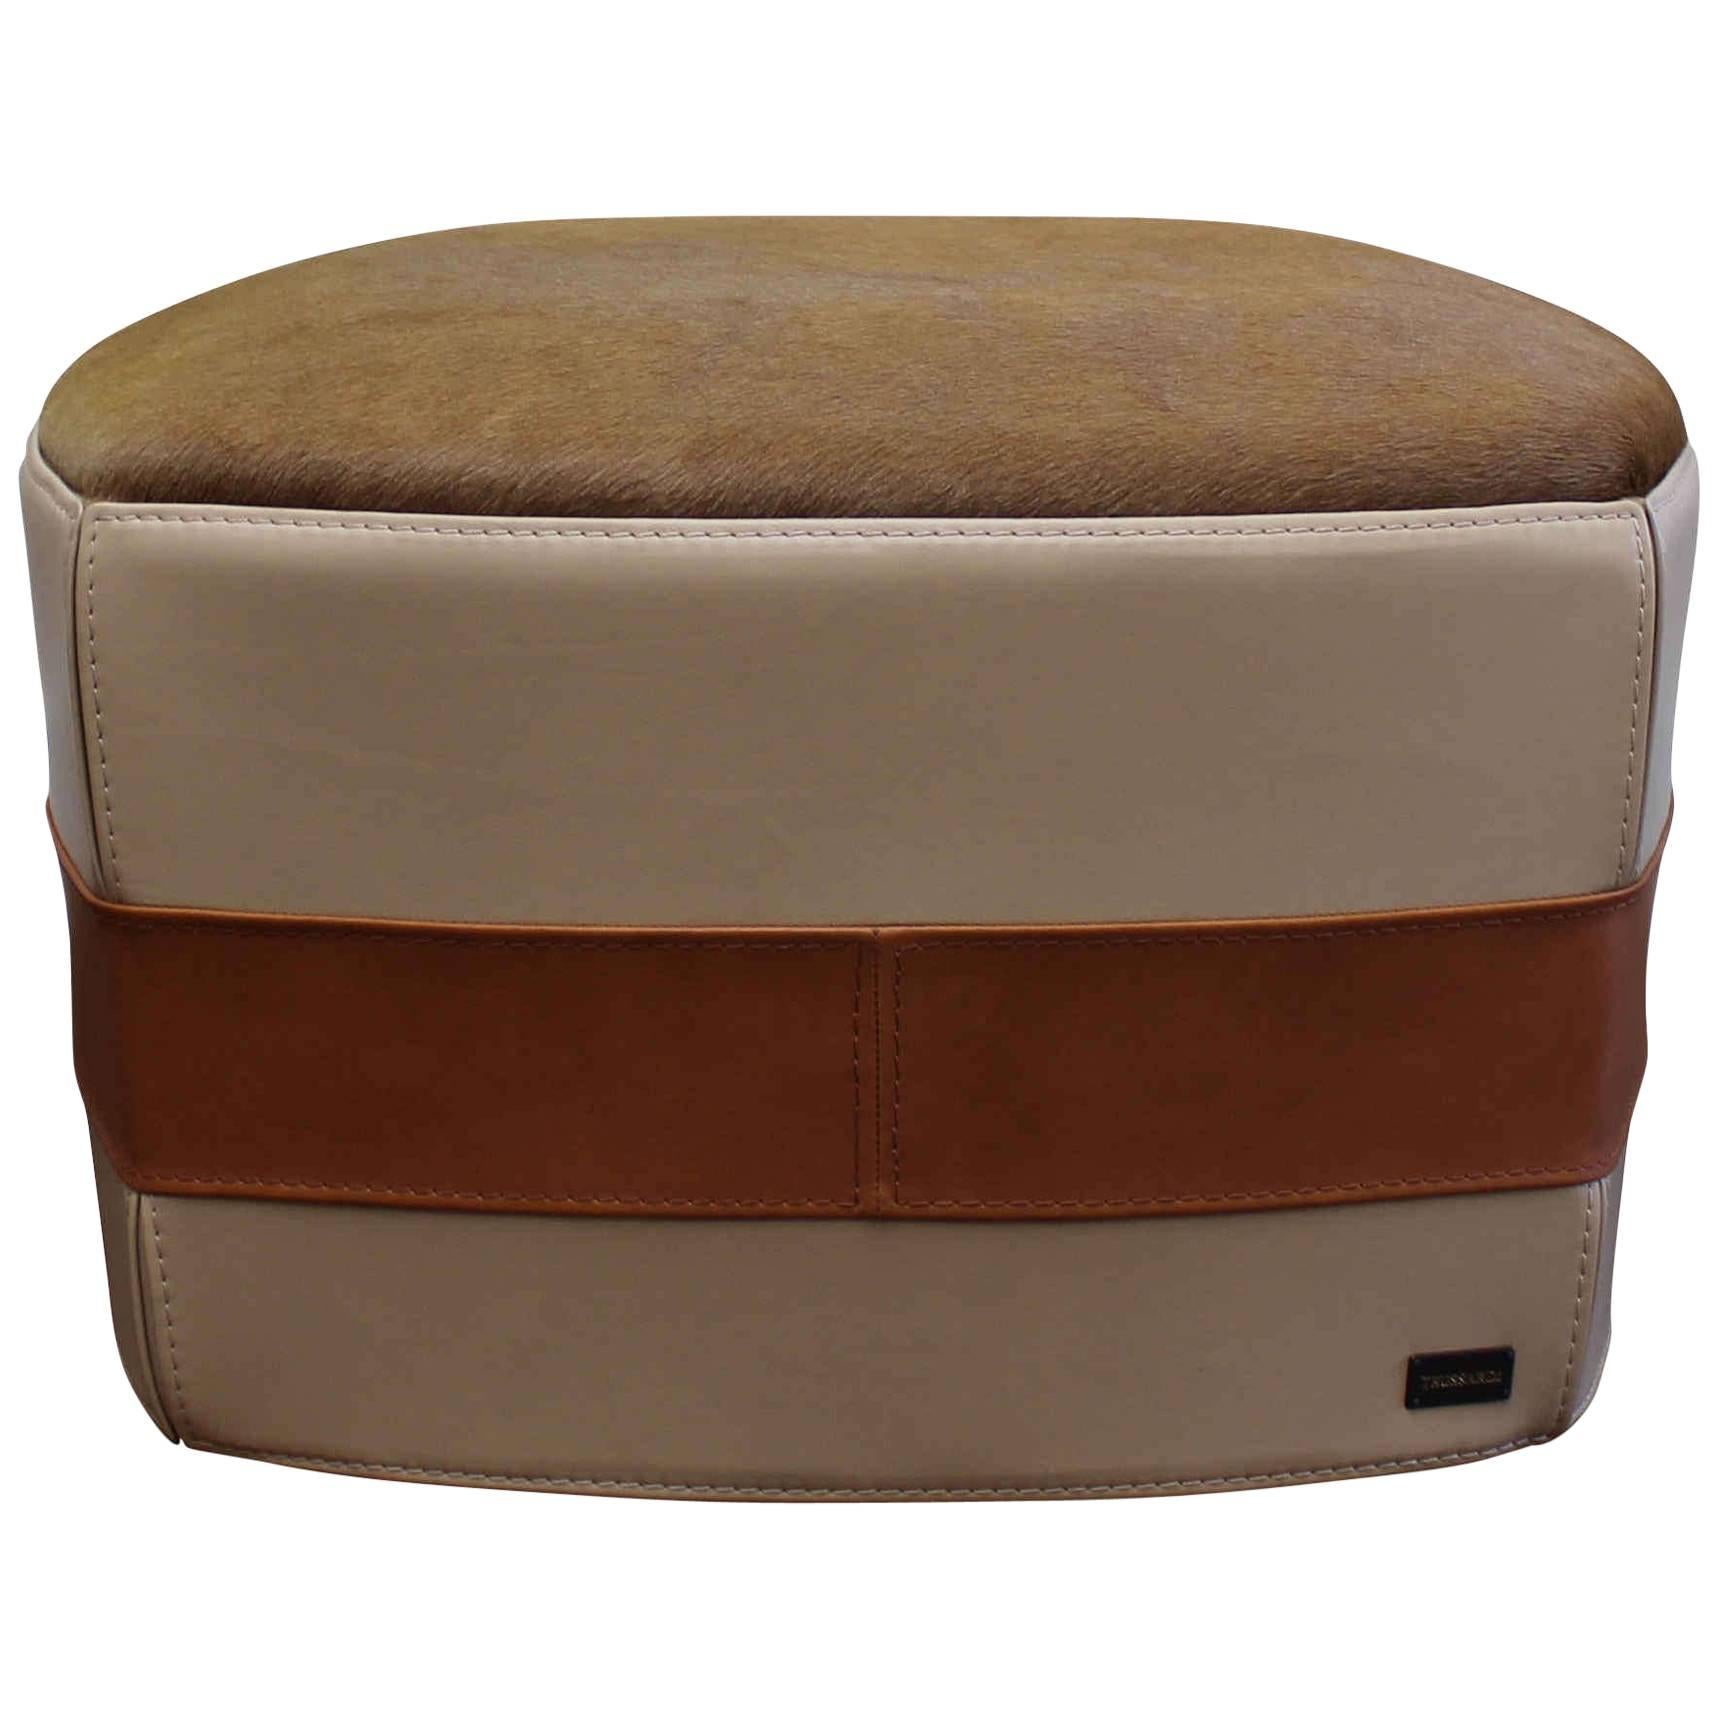 Trussardi Casa Ottomans Pouf 414, Cowhide, Maryland Lux Leather For Sale